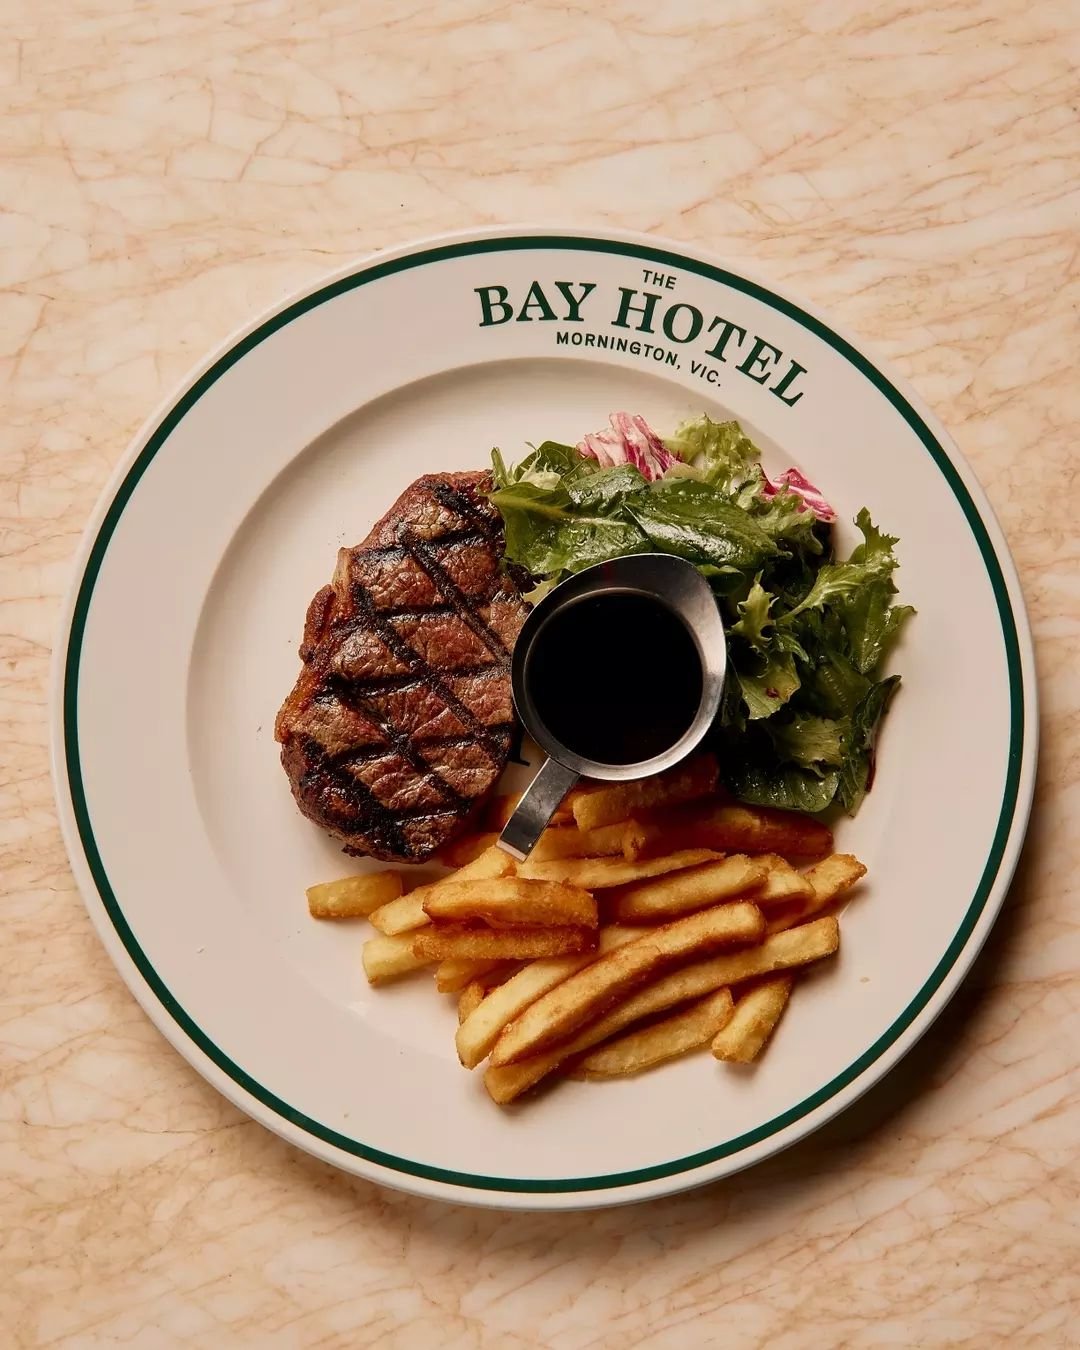 Tomorrow's dinner plans? Swing by for steak night.

Dig into a flame grilled porterhouse served with chips &amp; salad for $29, every Tuesday from 12pm. #thebayhotelmornington